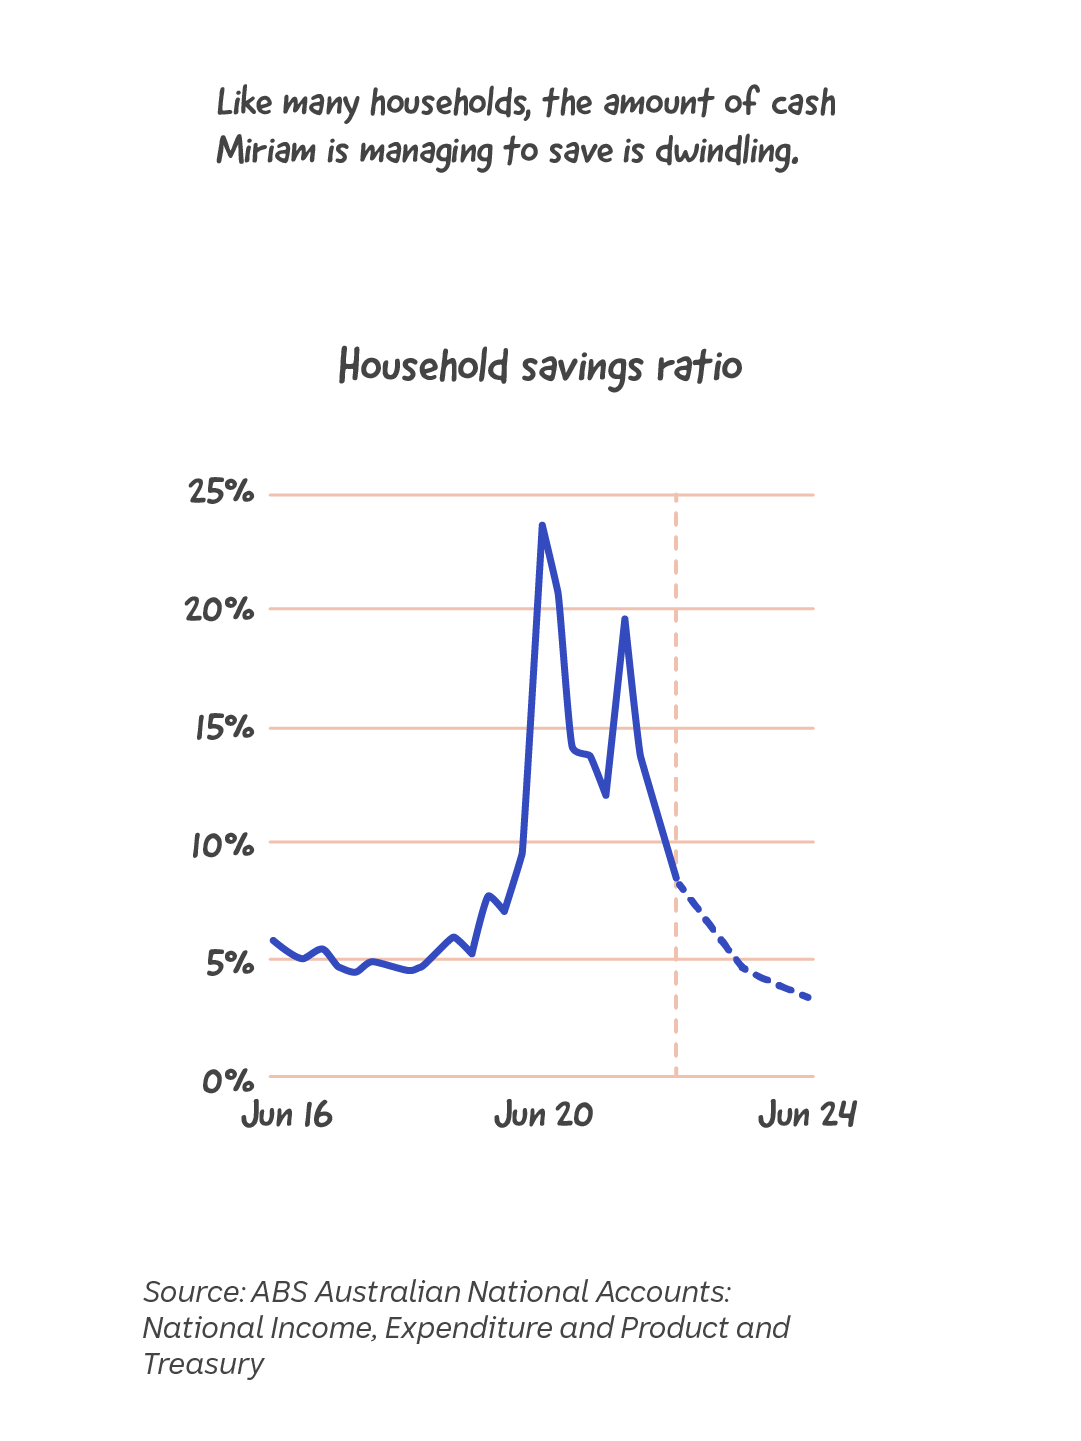 Miriam's savings are dwindling like many households with a graph showing savings declining